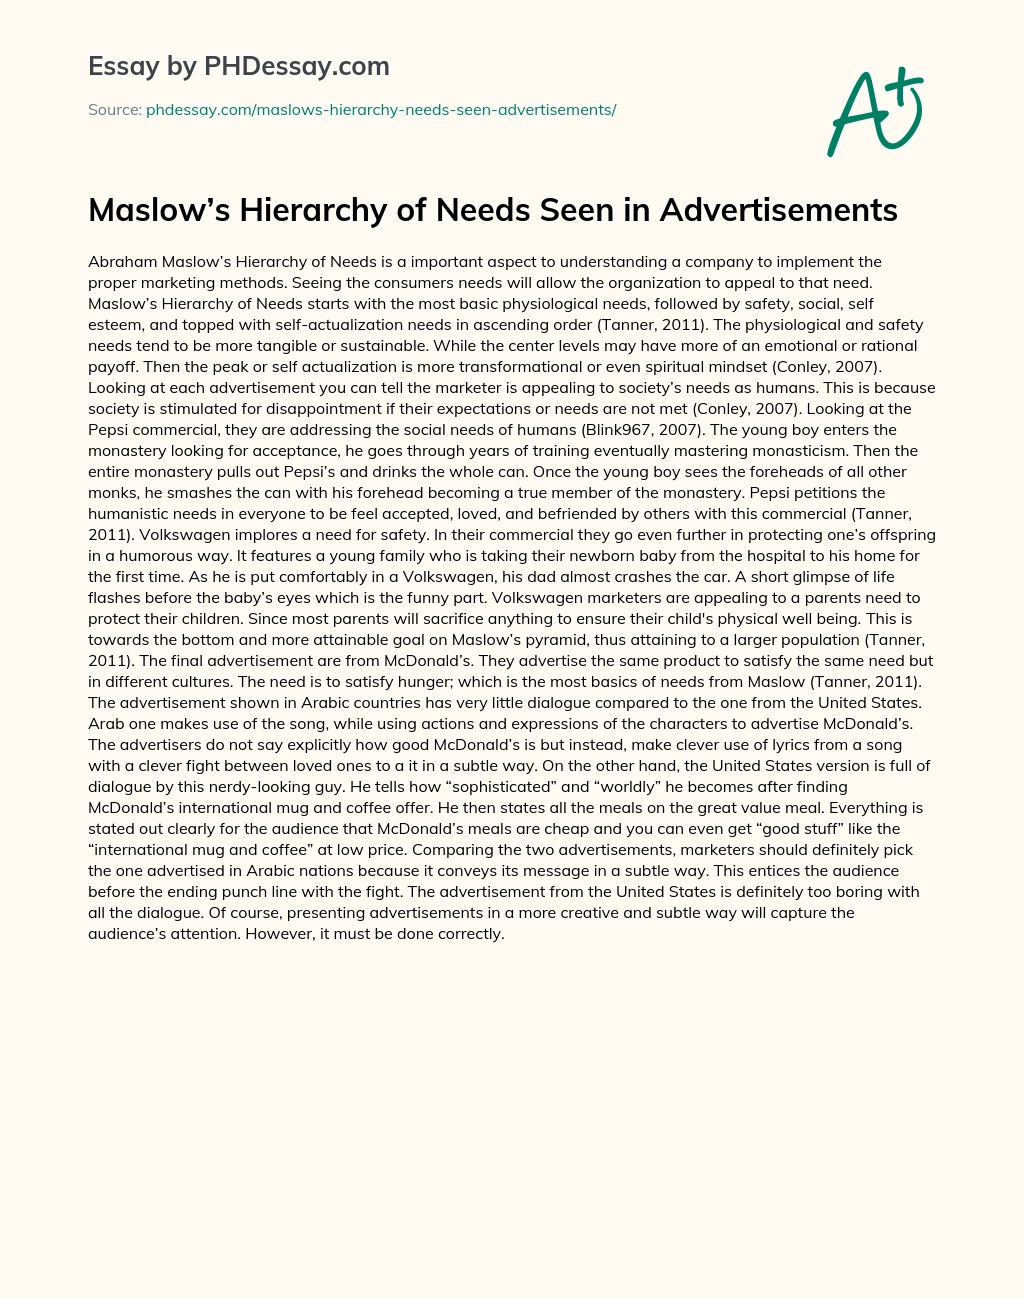 Maslow’s Hierarchy of Needs Seen in Advertisements essay